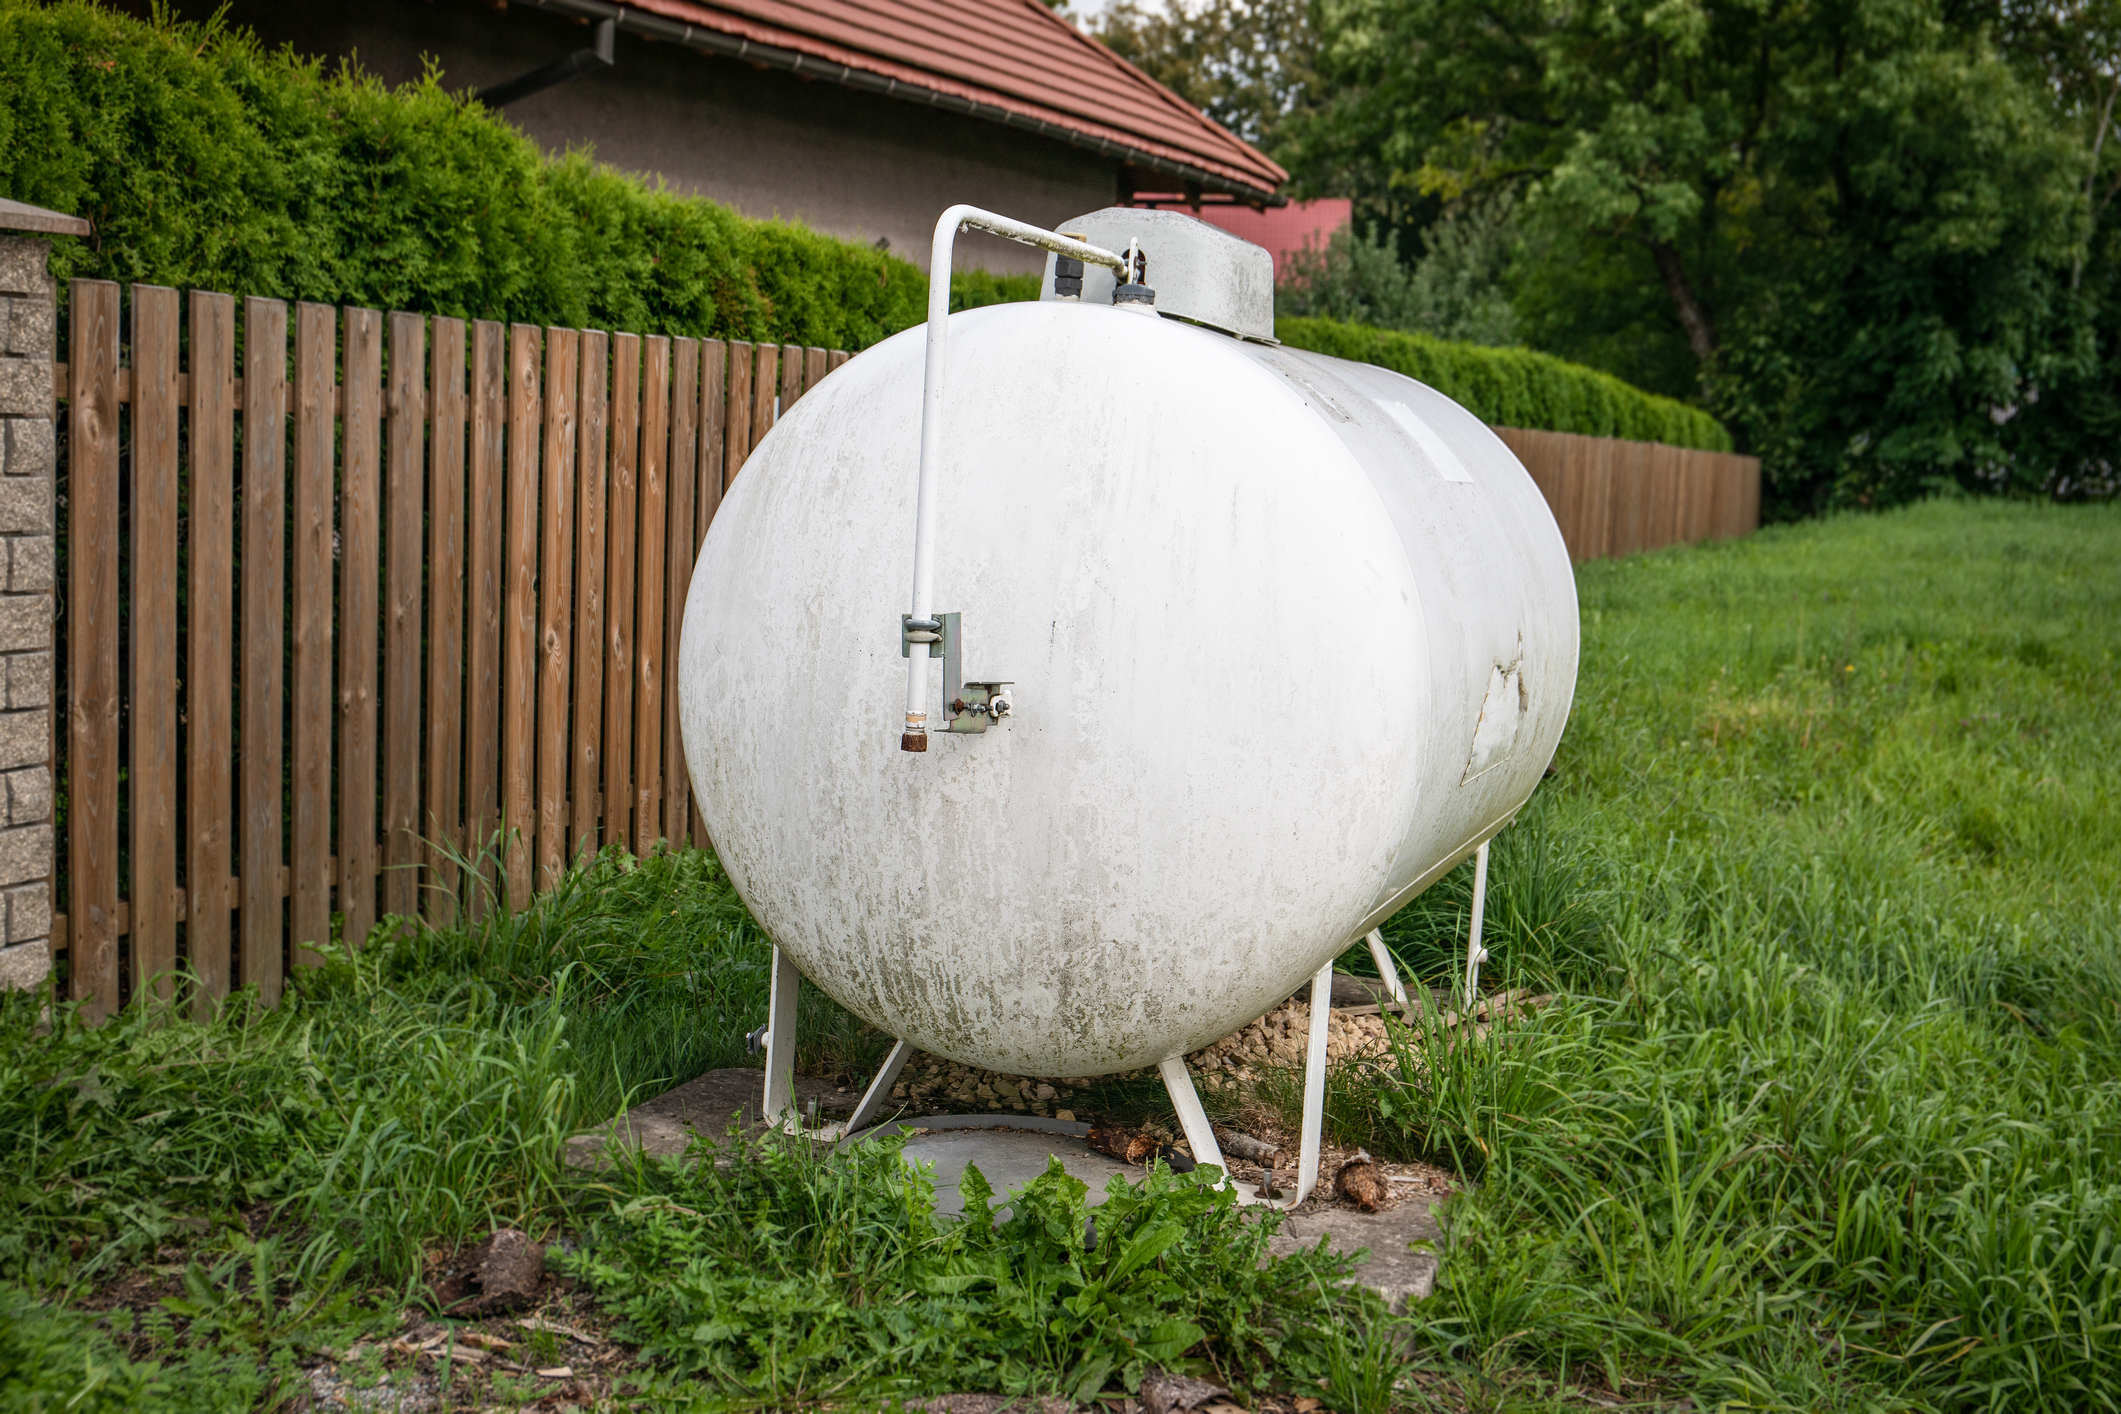 Gas tank for heating the house at the fence. Heating system.